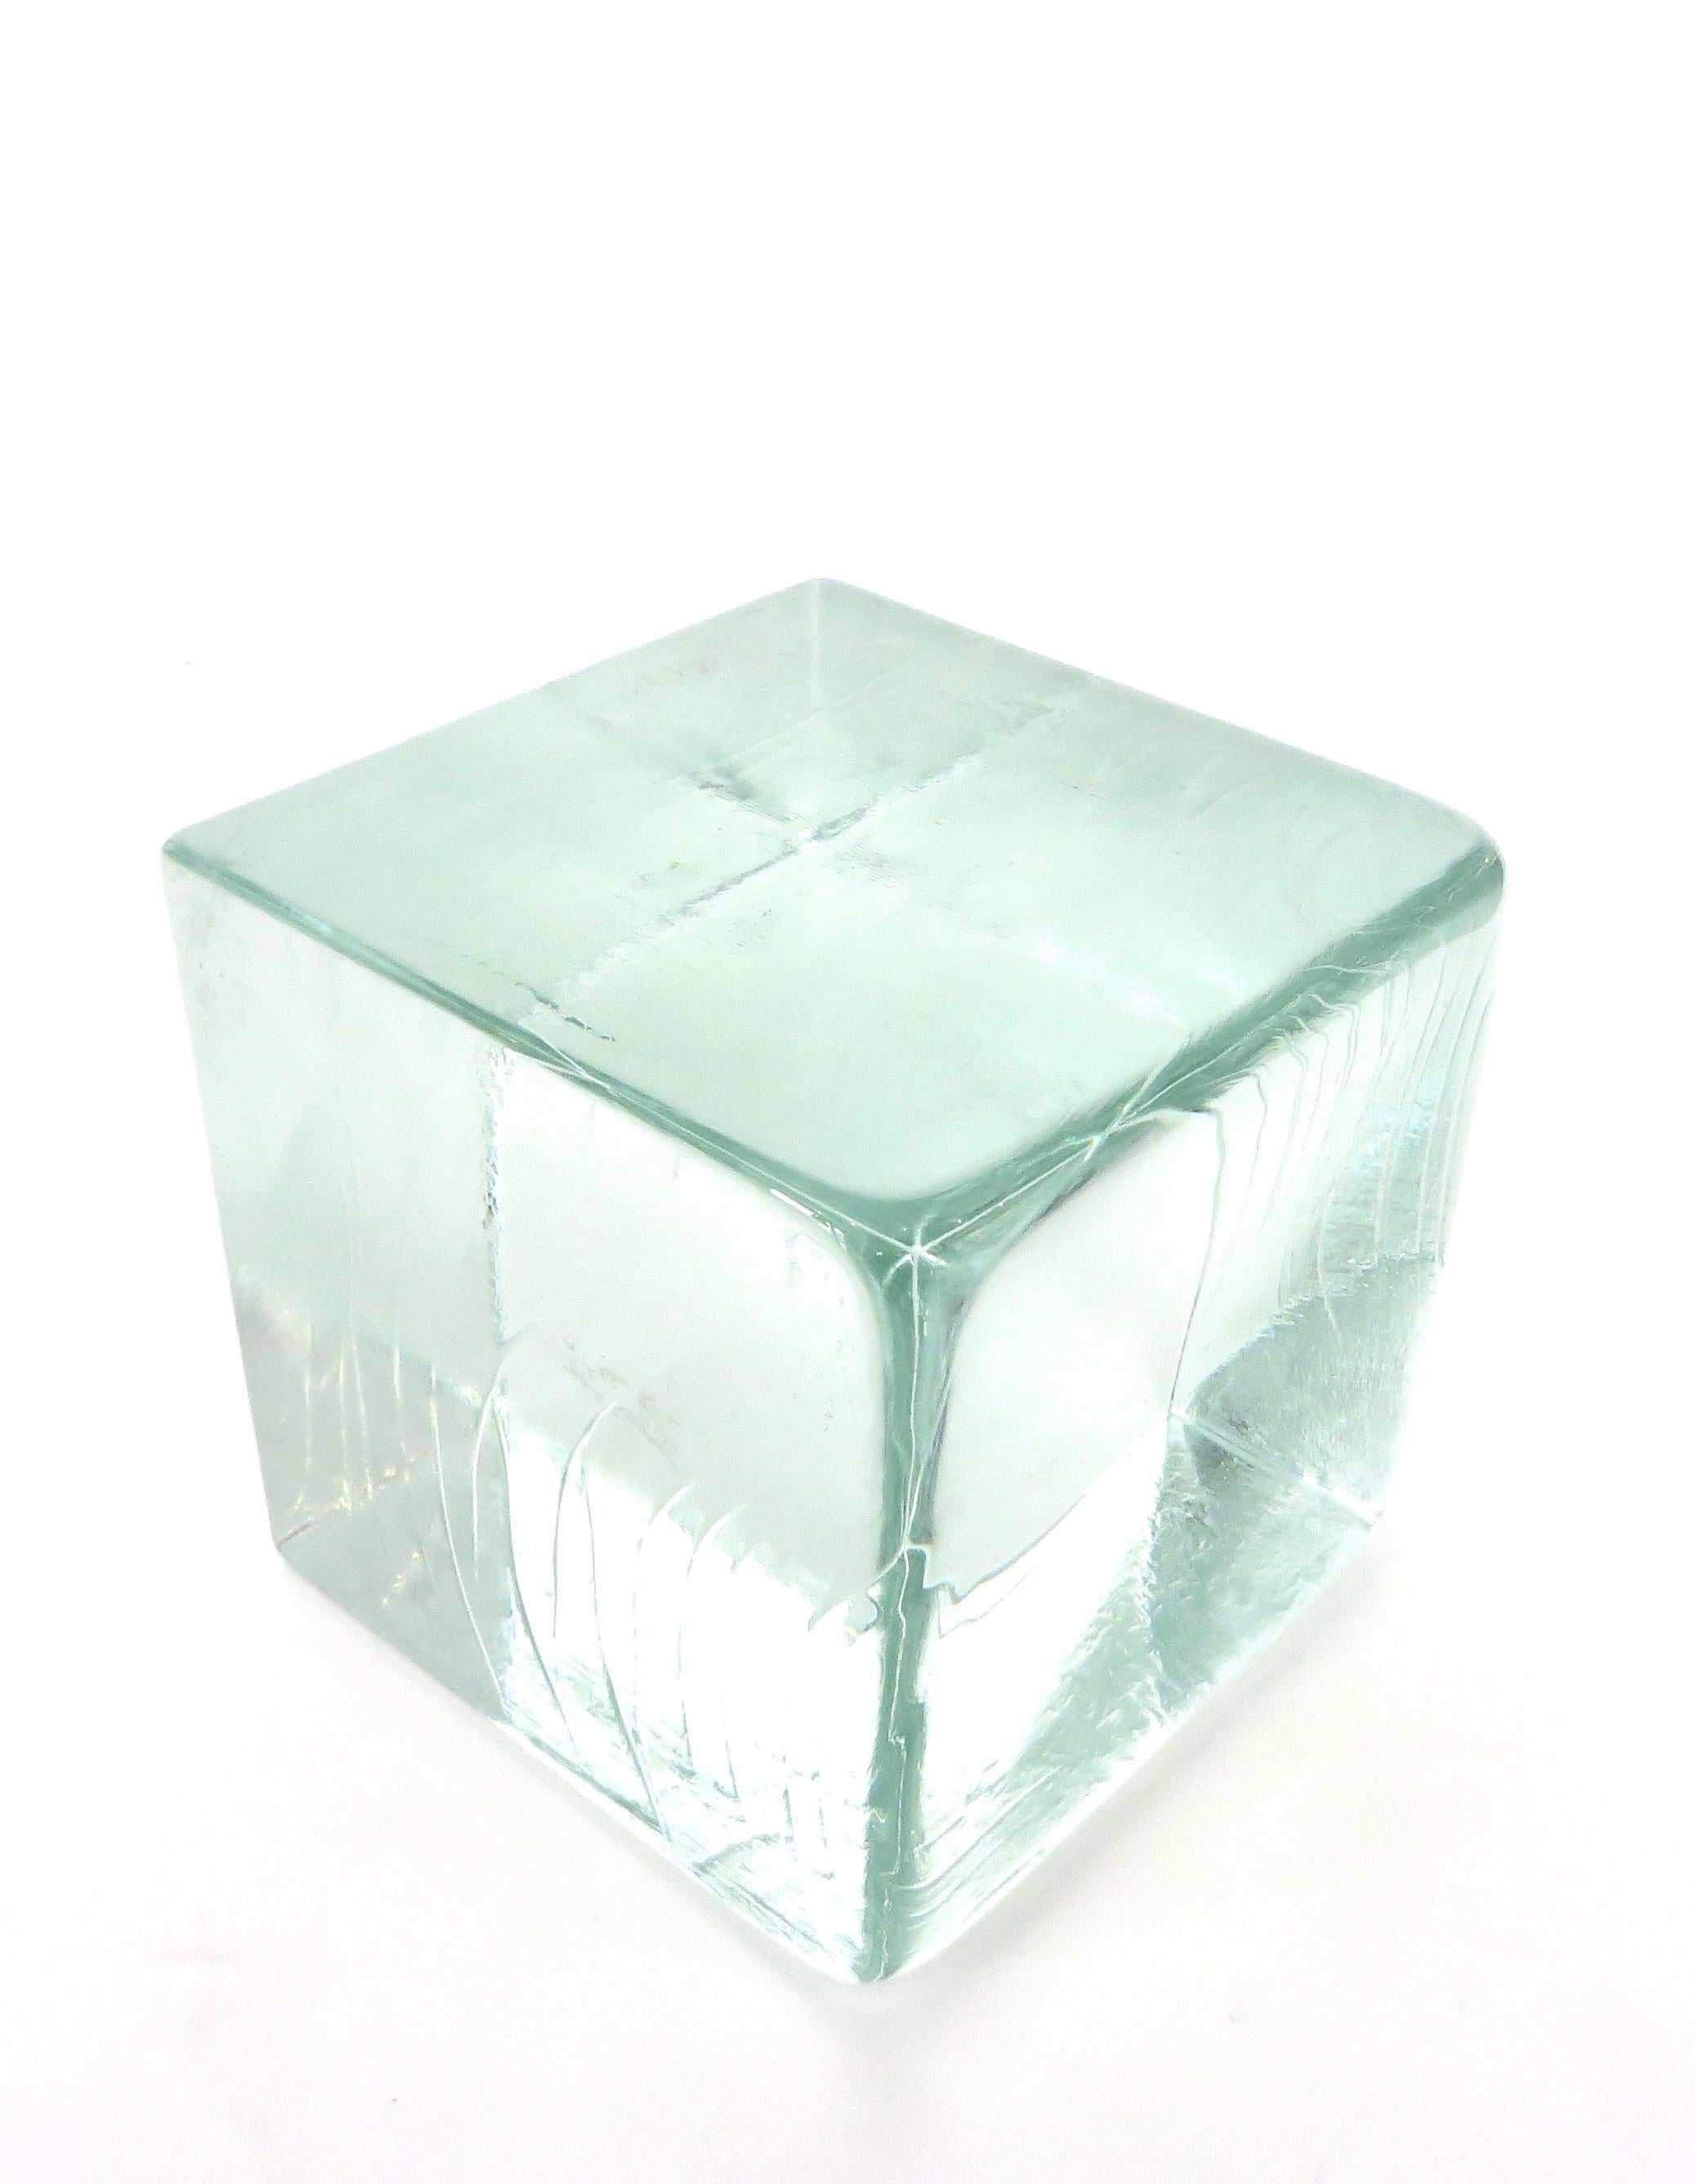 Monumental cast glass cube that can be used as a sculptural object or as a display cube with watery green coloration.